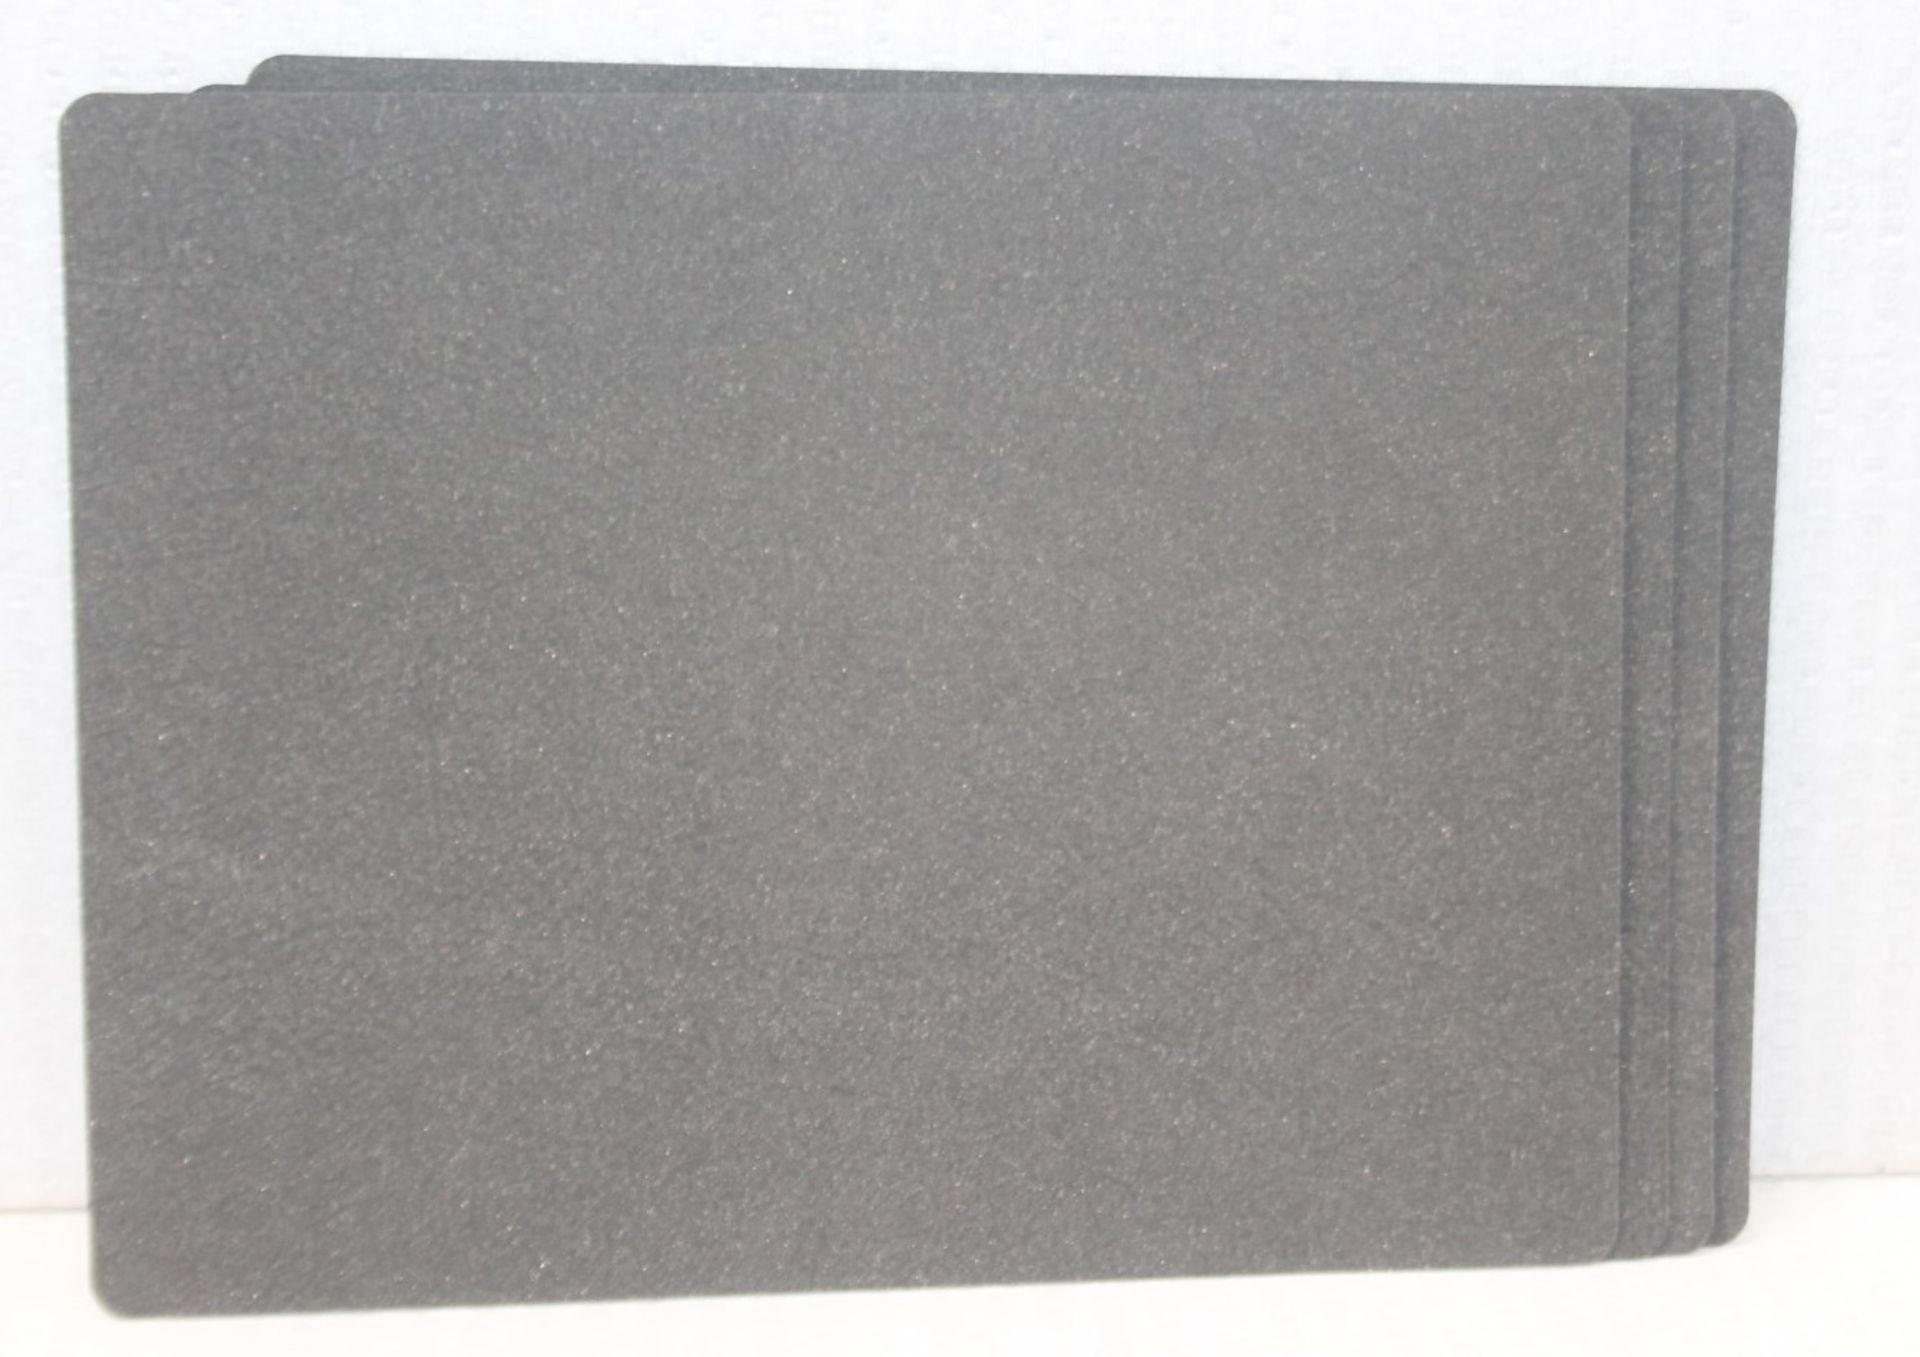 Set of 4 x LIND DNA 'Hippo' Leather Square Placemats Table Mats, In Black - Original Price £72.95 - Image 9 of 9